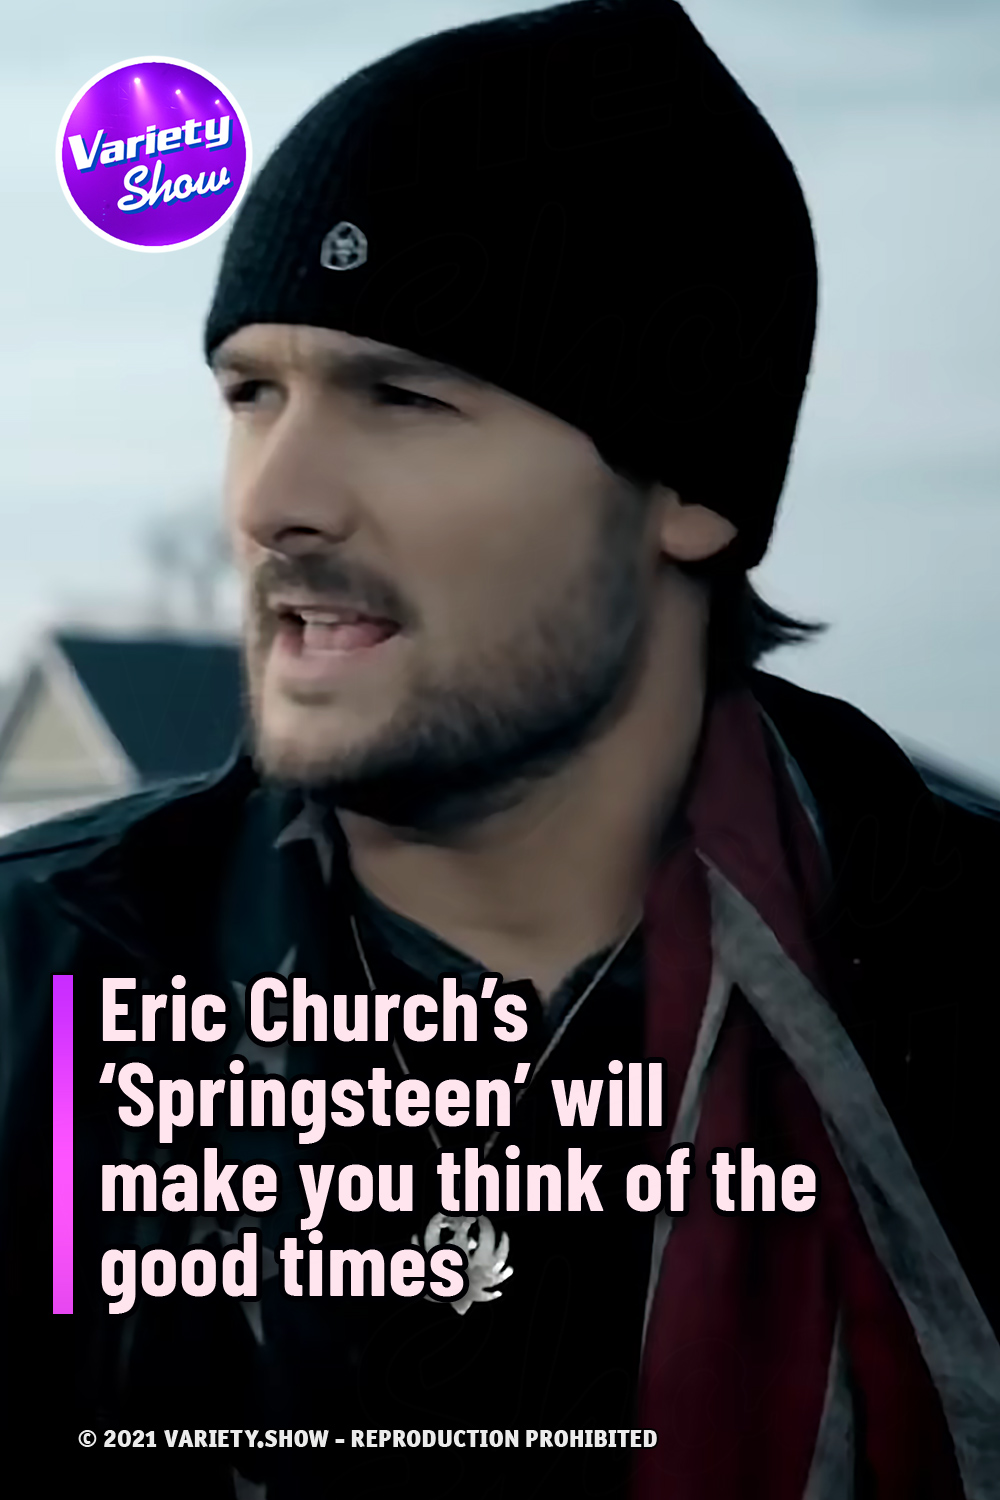 Eric Church’s ‘Springsteen’ will make you think of the good times